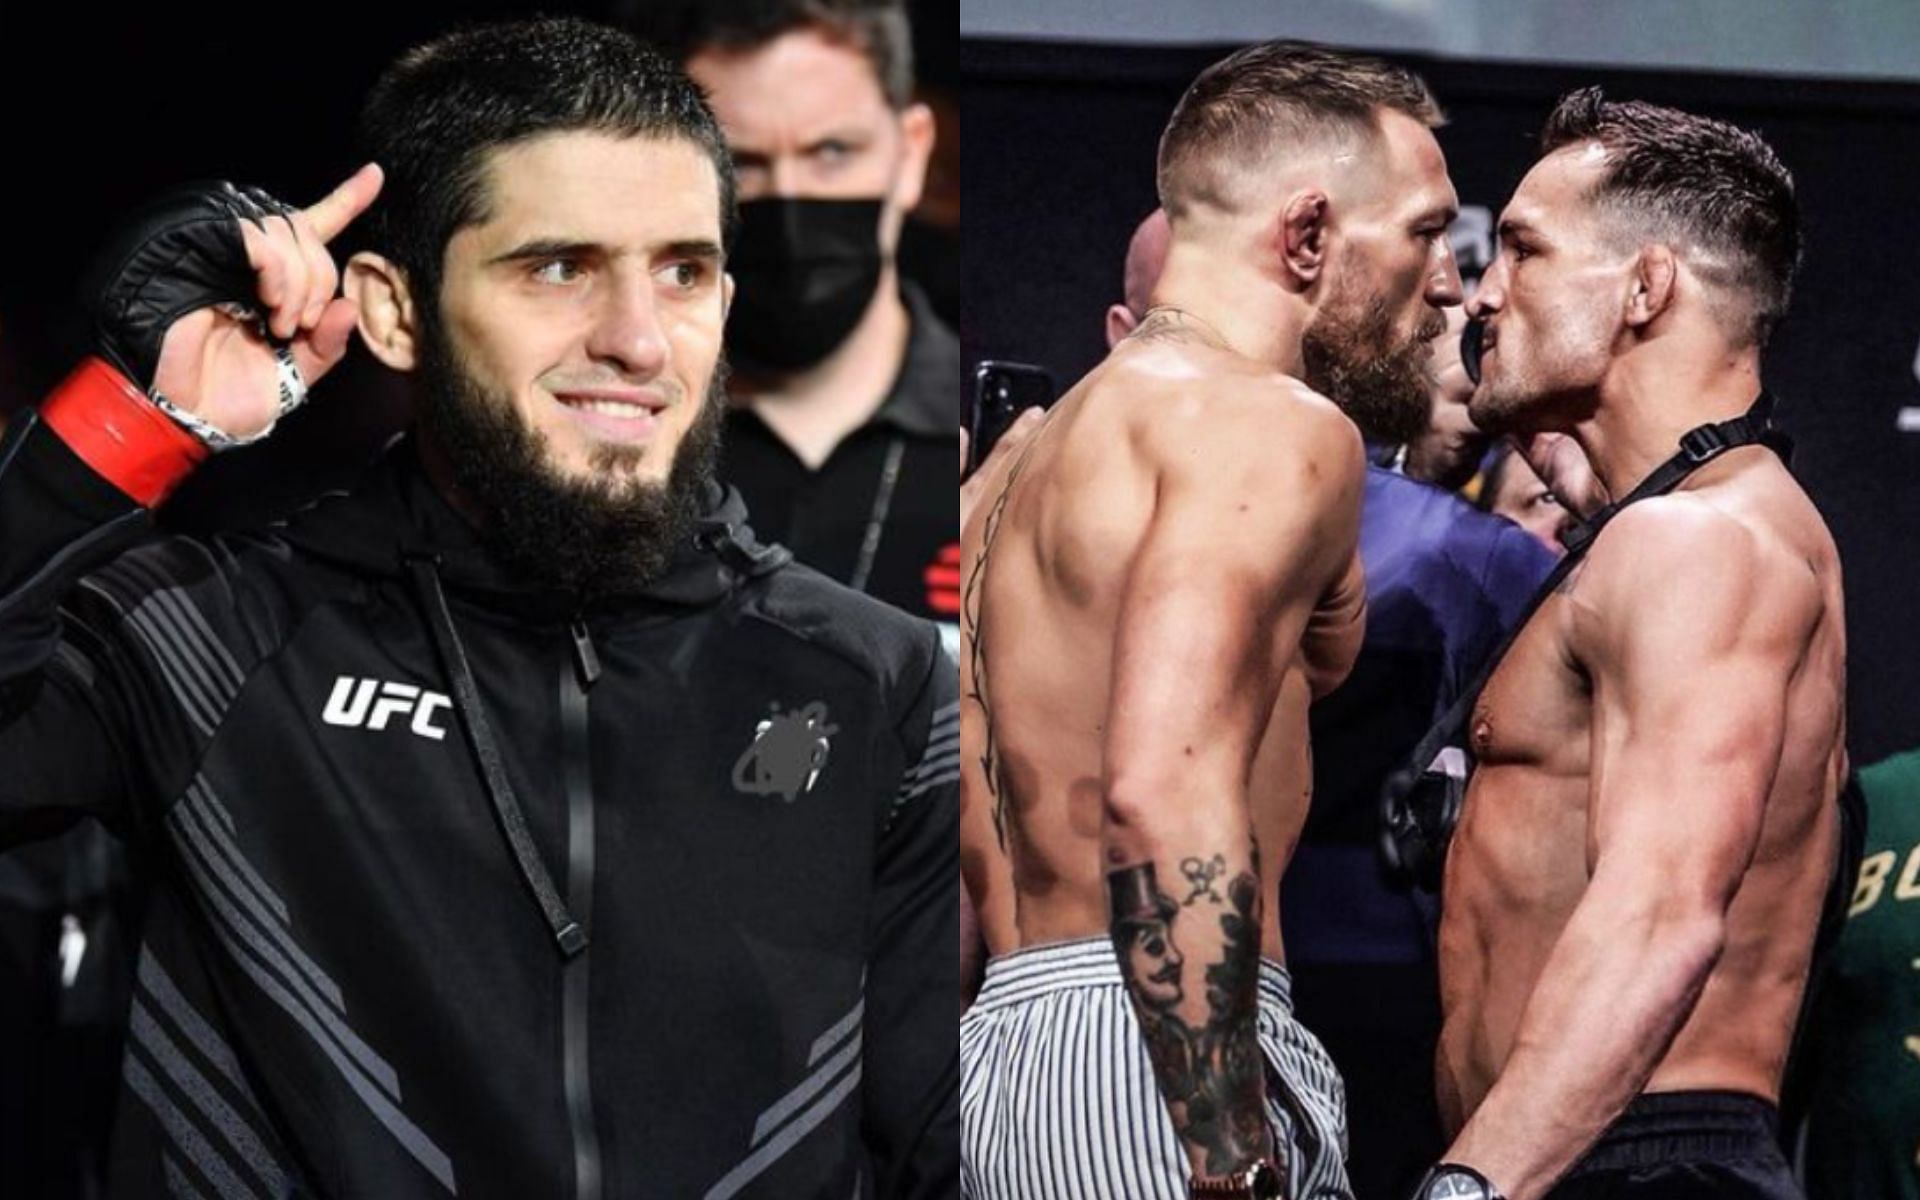 Islam Makhachev (left) disapproves of Michael Chandler (far right) waiting on the return of Conor McGregor (middle right) [Images Courtesy: @islam_makhachev and @mikechandlermma on Instagram]